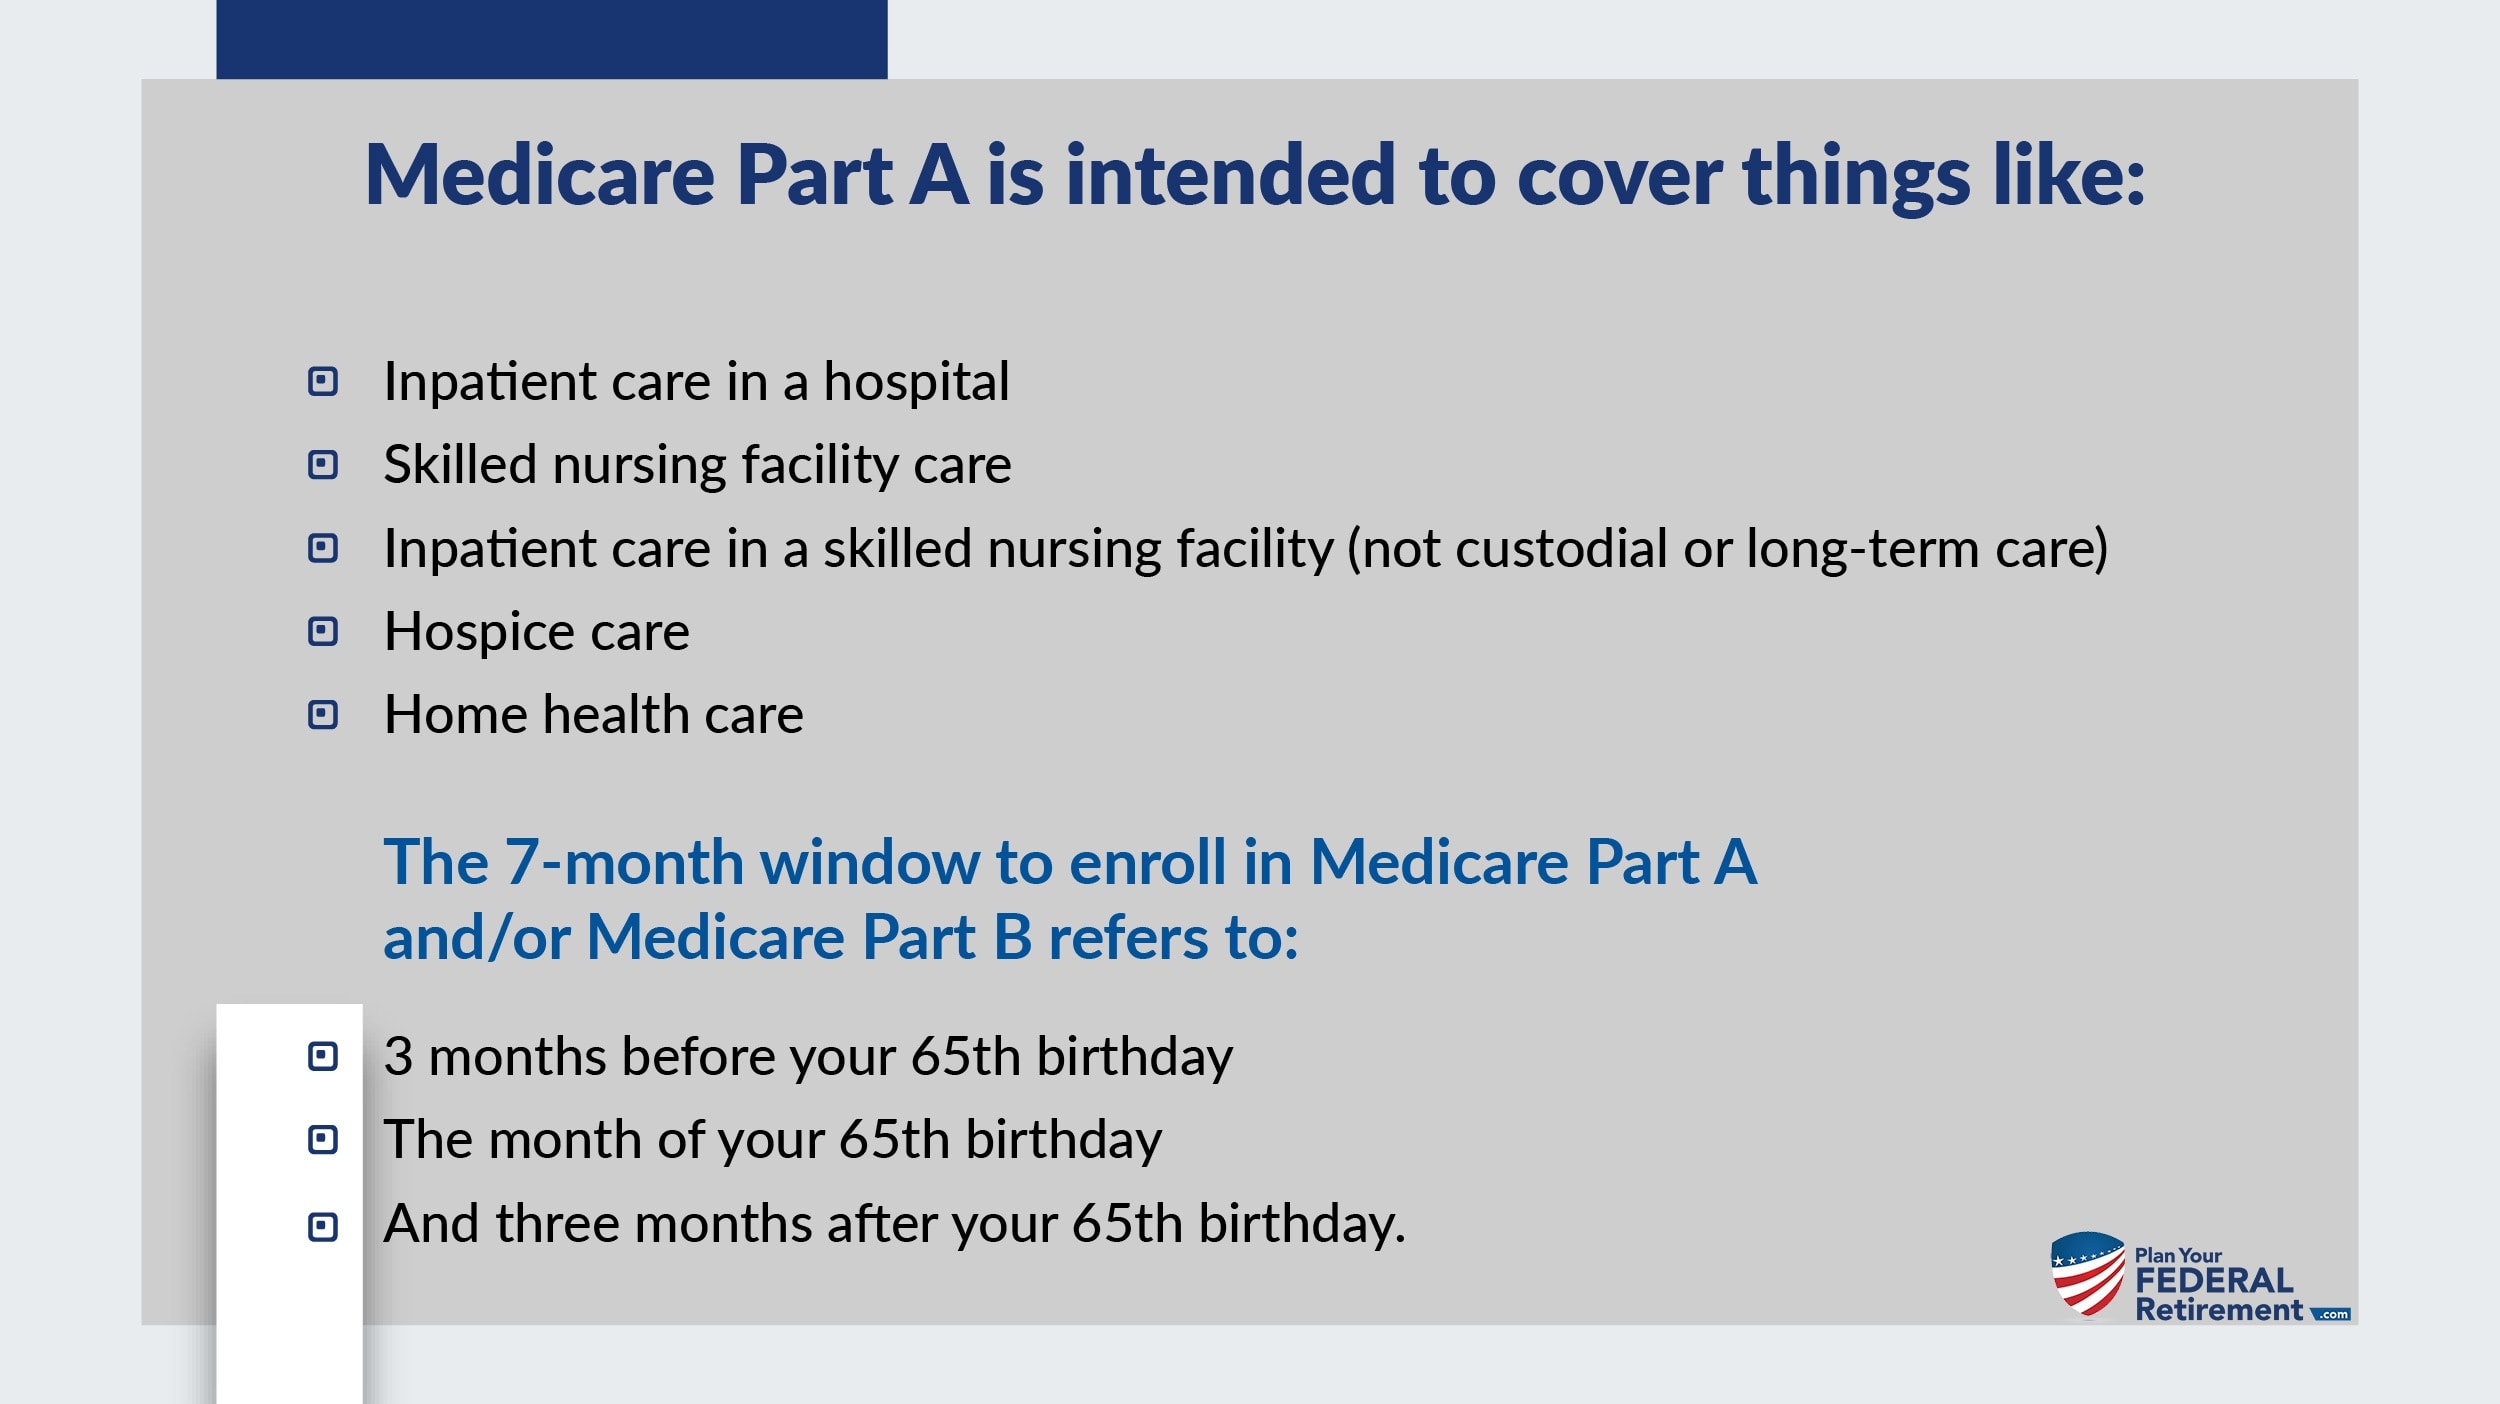 medicare part abcd defined